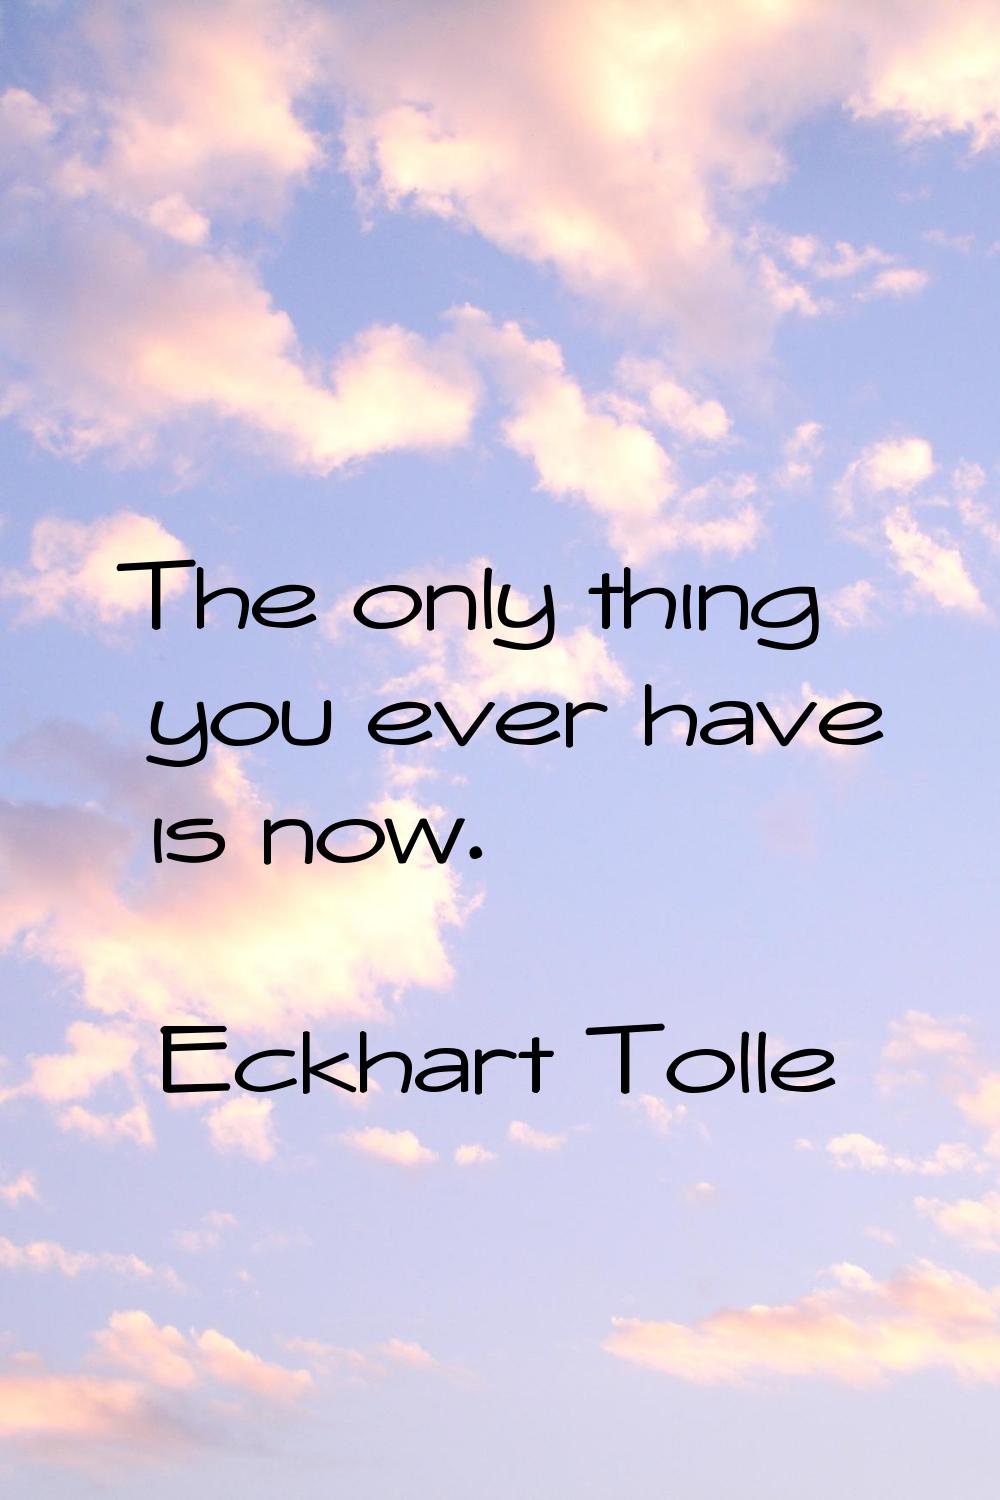 The only thing you ever have is now.